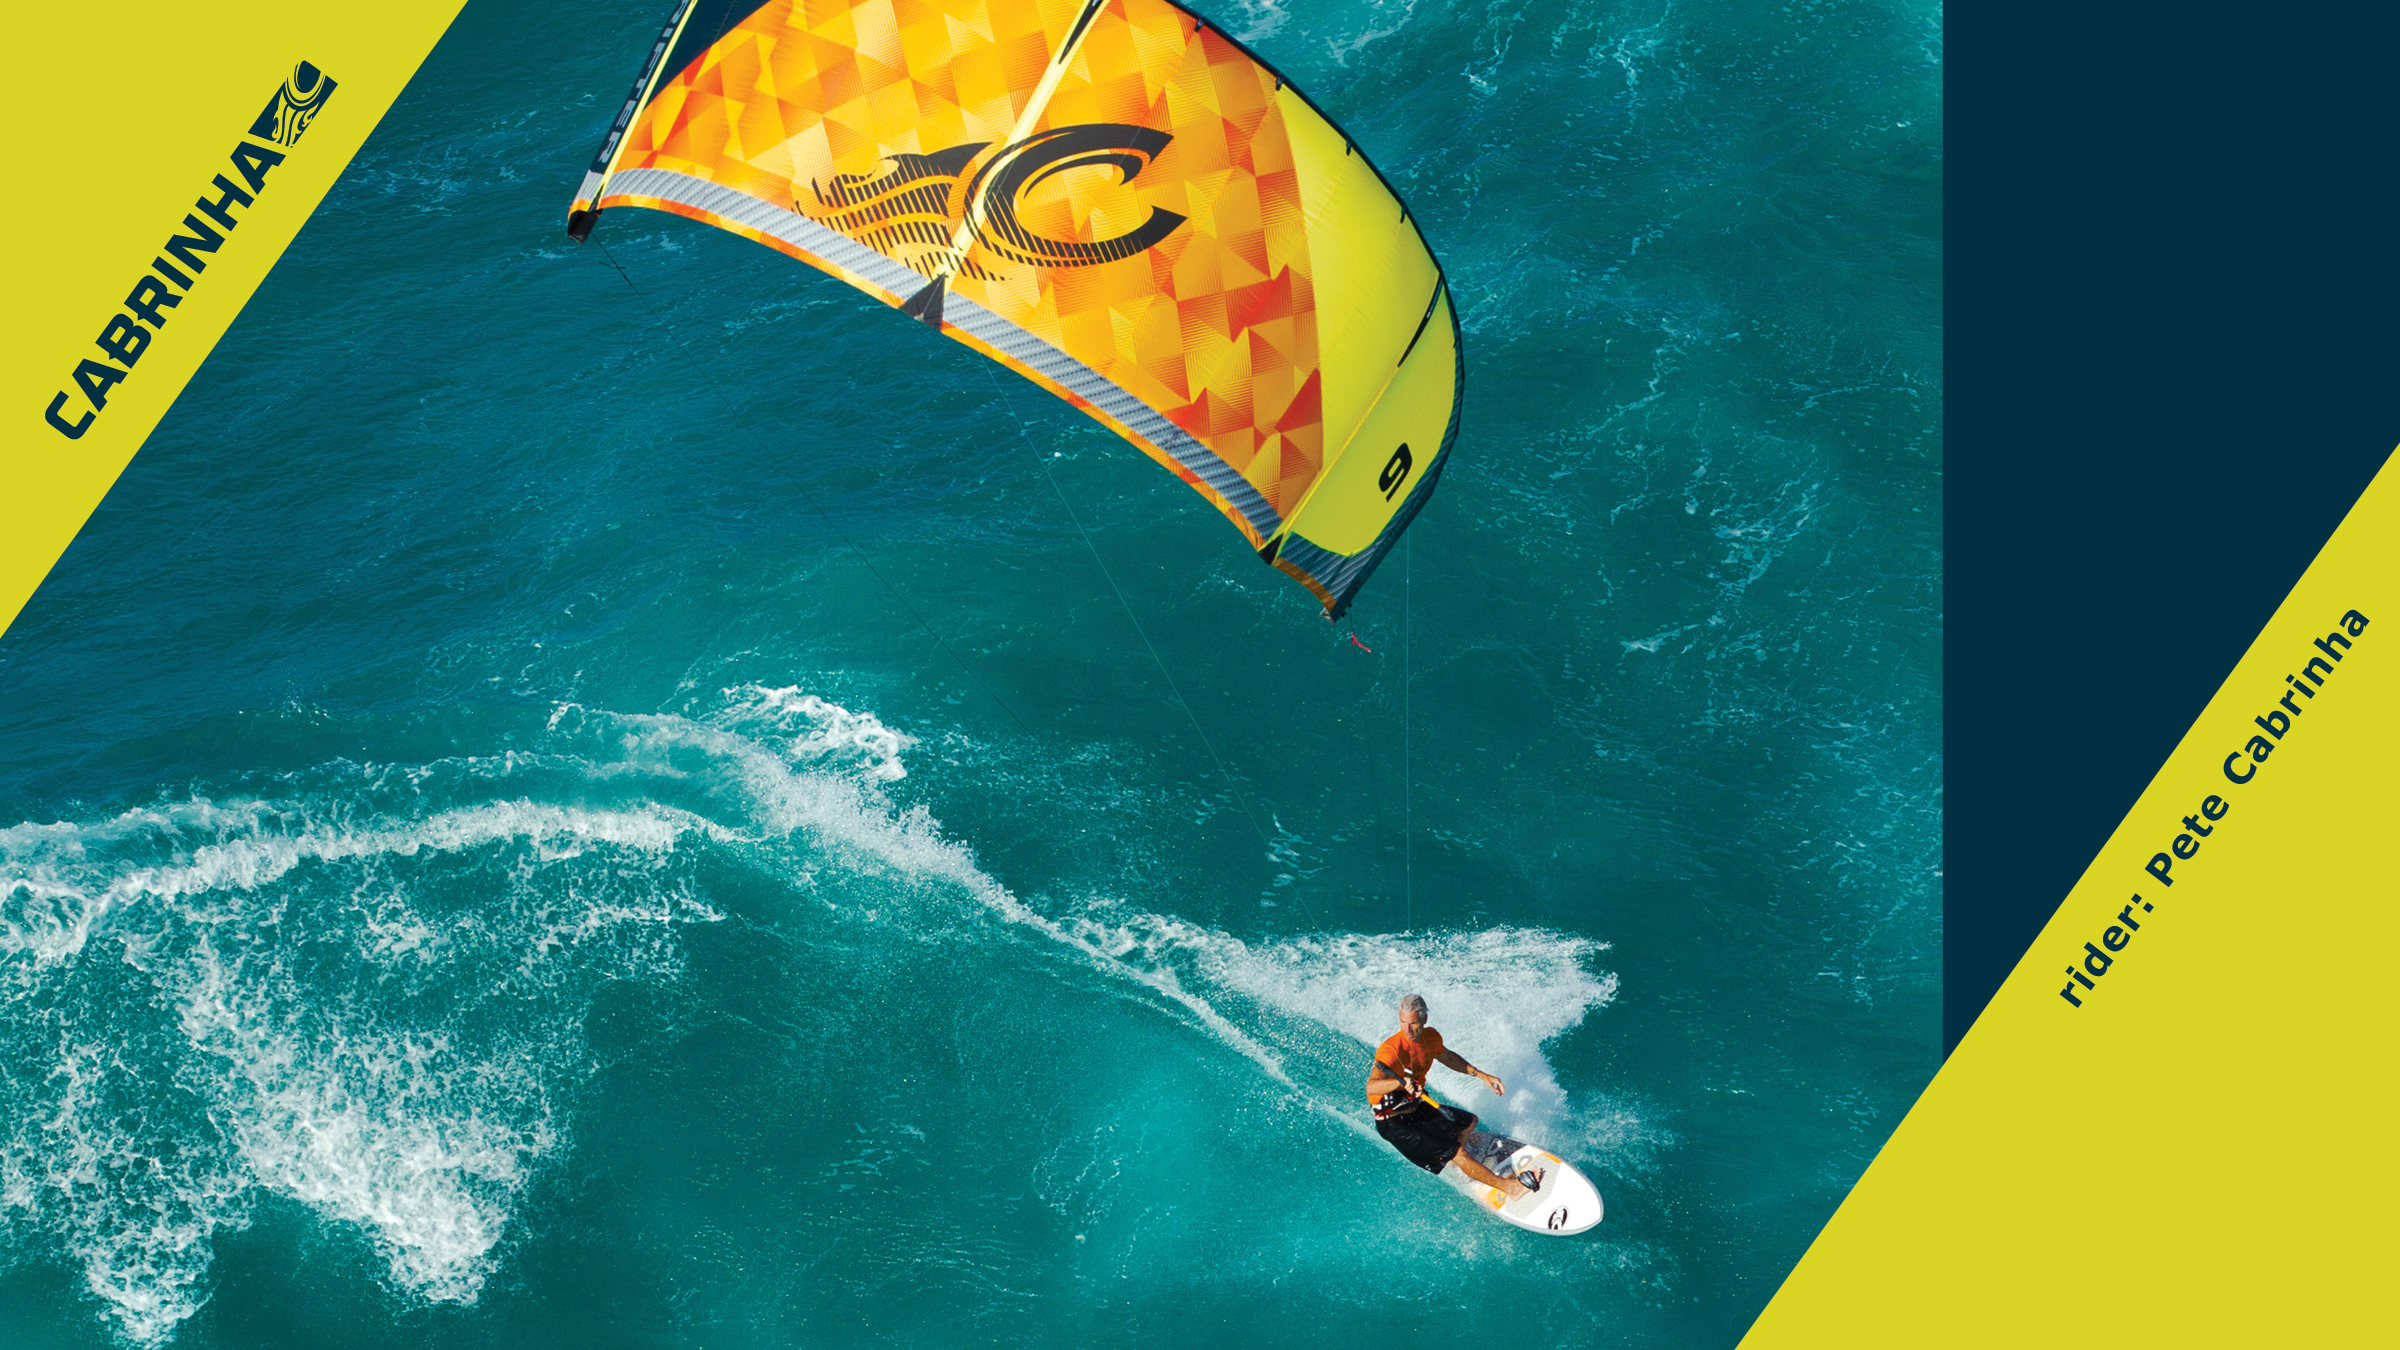 kitesurf wallpaper image - Pete Cabrinha on the 2015 drifter kite in Hawaii. - in resolution: High Definition - HD 16:9 2400 X 1350